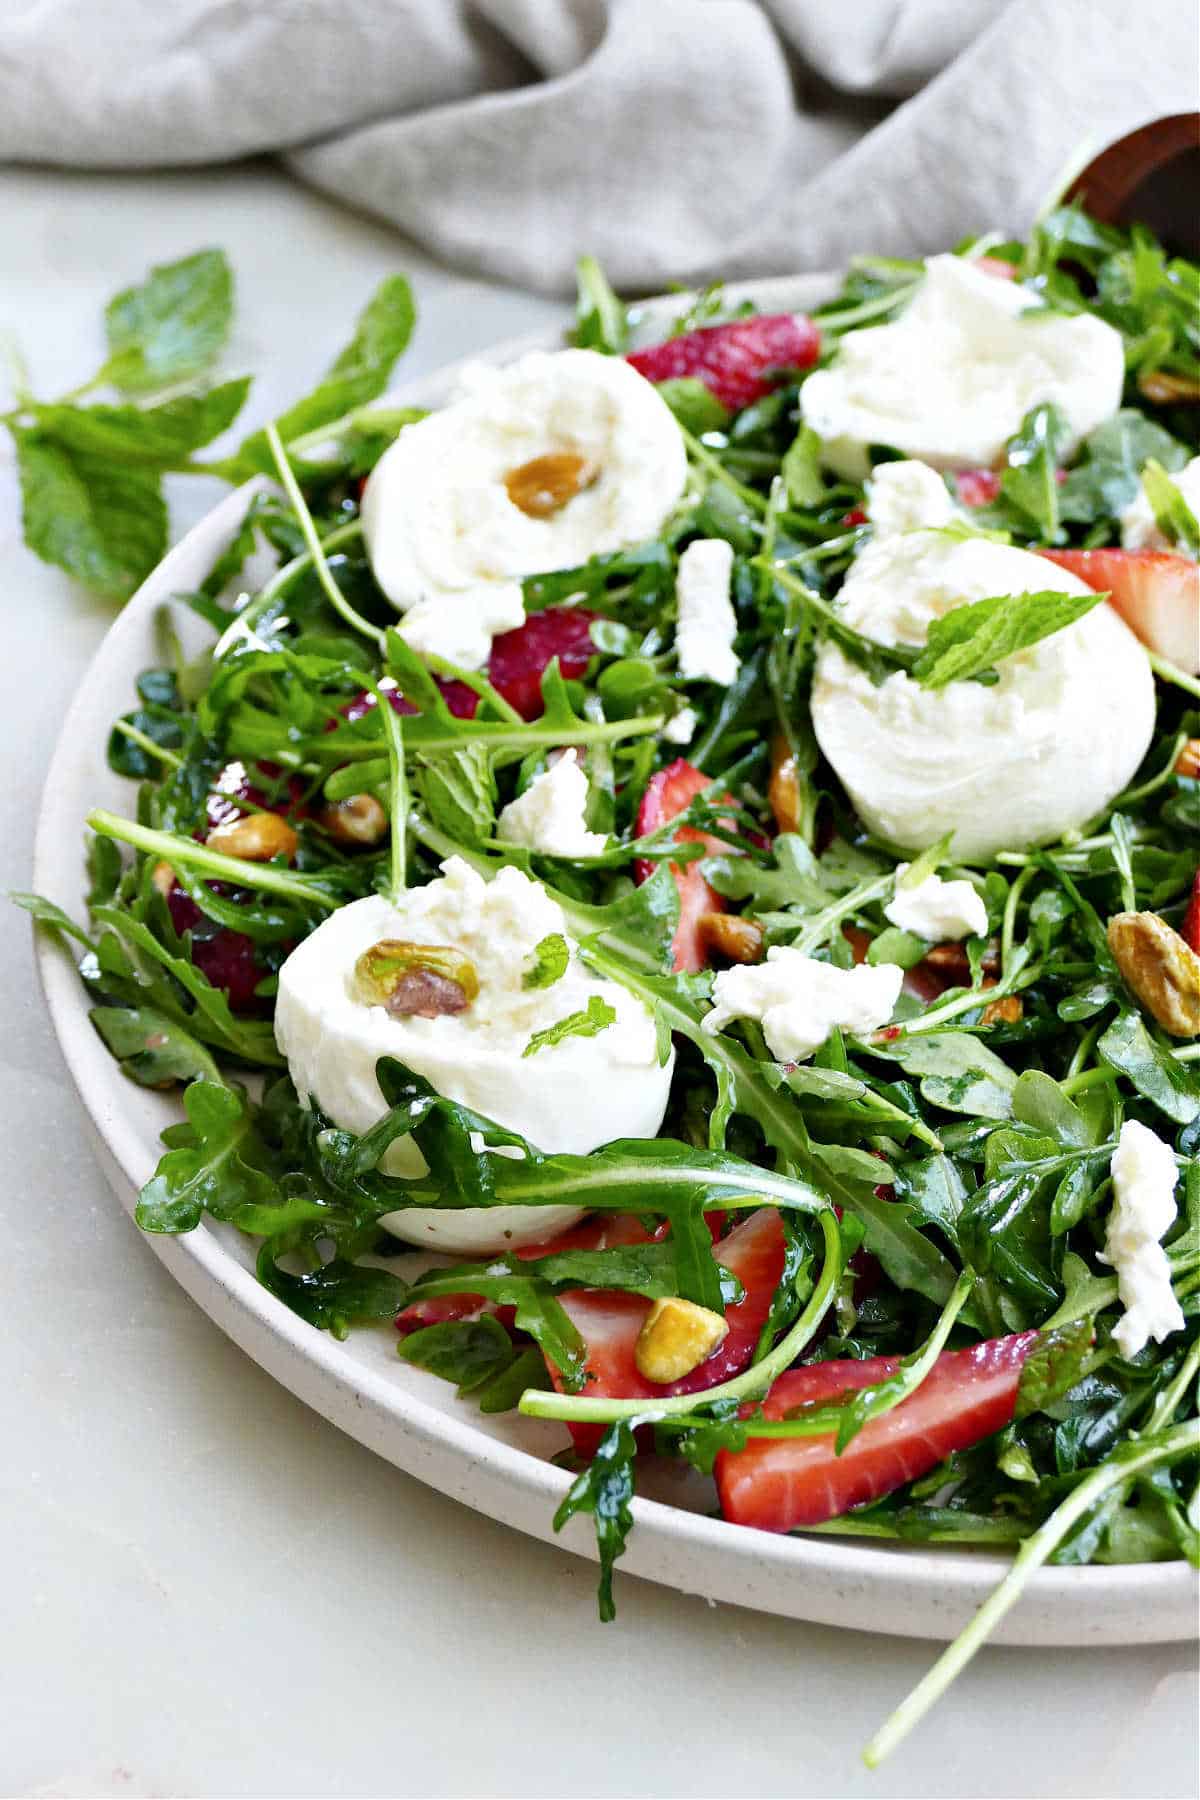 arugula, burrata cheese, berries, and pistachios tossed in dressing on a plate